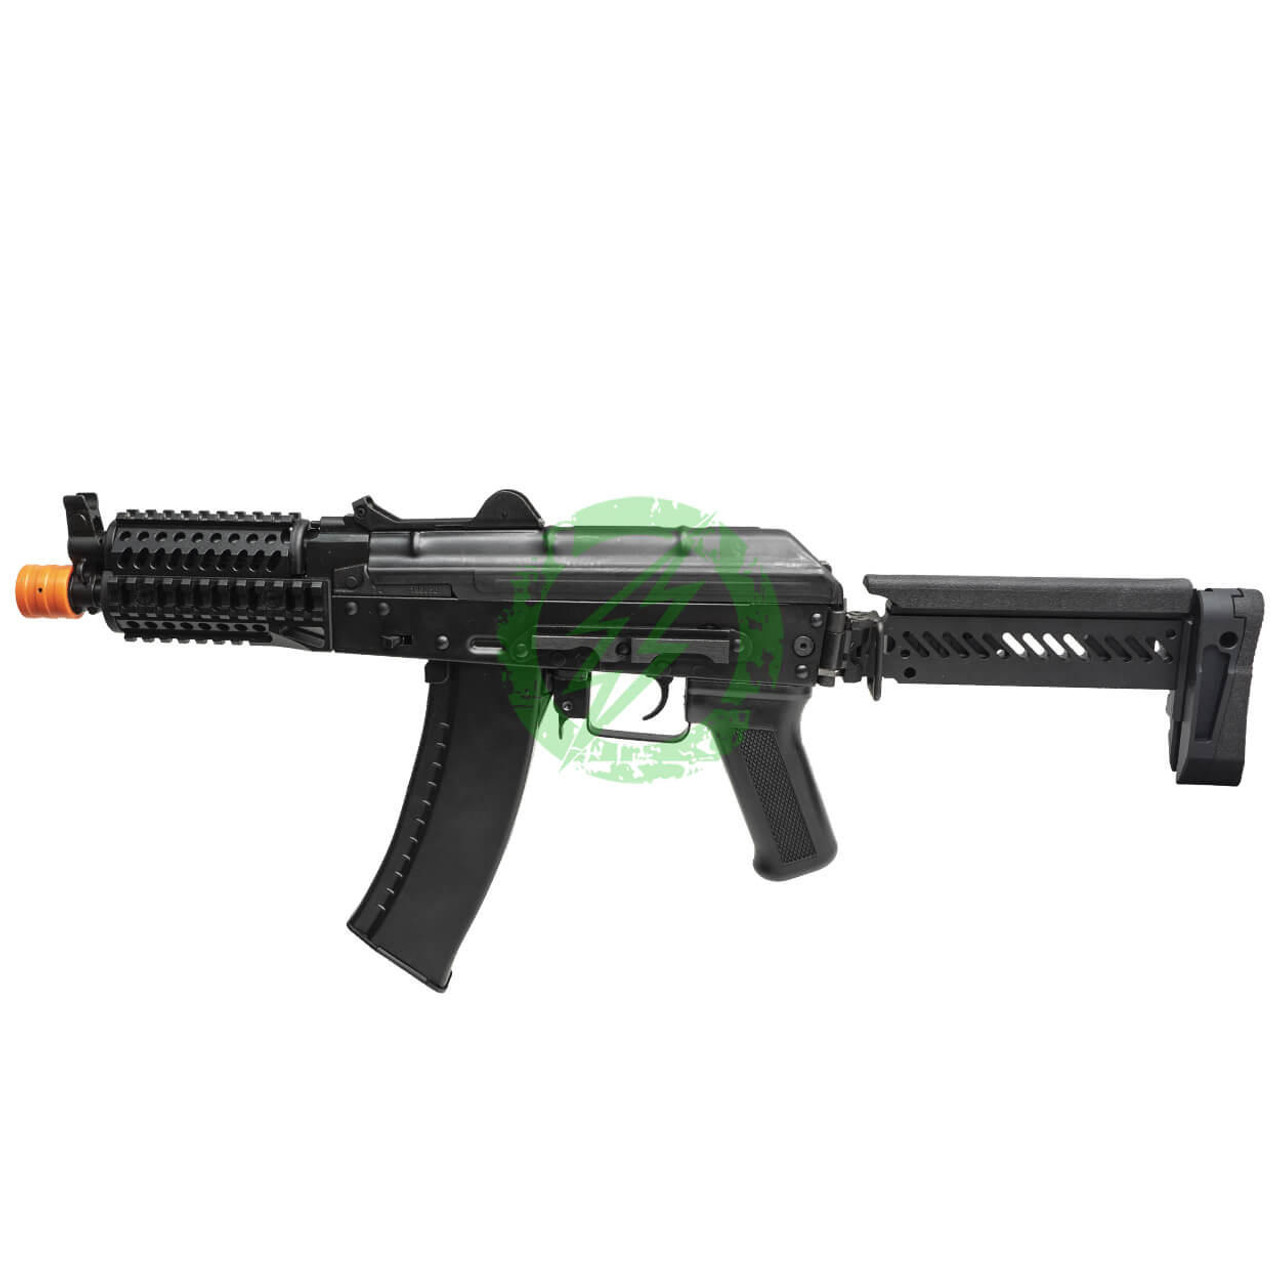  LCT ZKS-74UN Stamped Steel ZK Series AK Airsoft AEG Rifle with Side-Folding Stock 